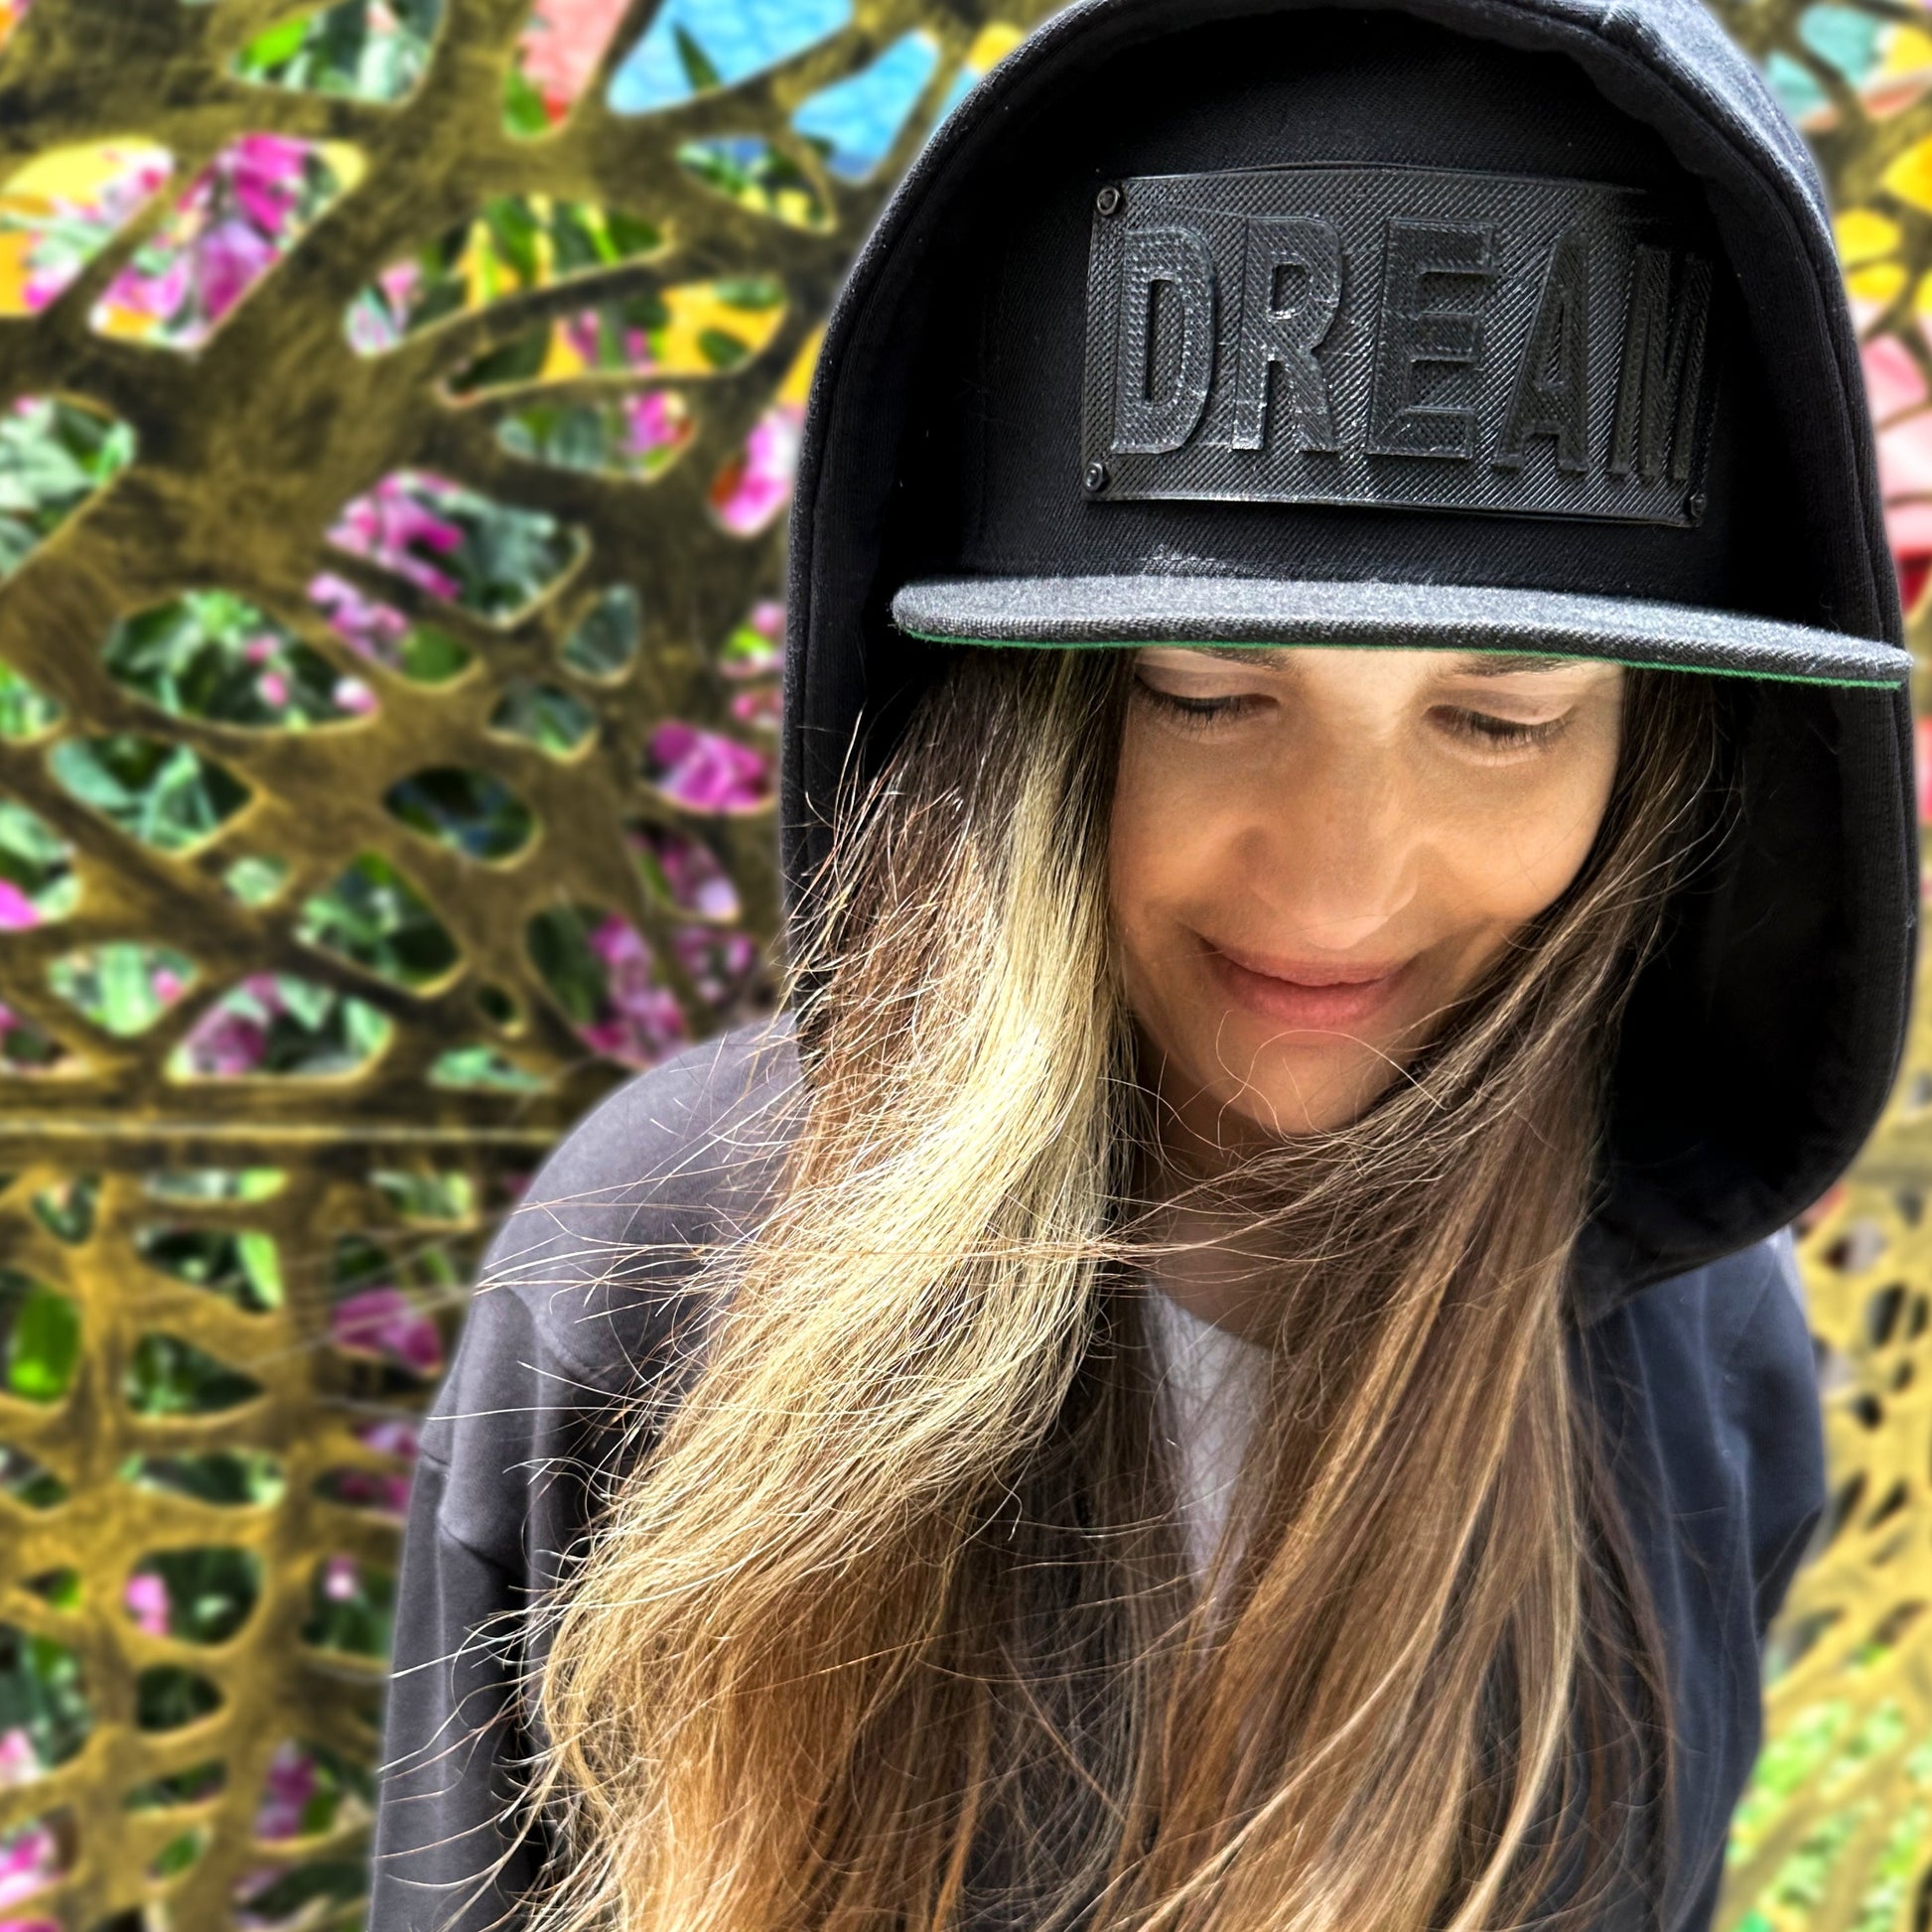 3D Printed DREAM snapback by 3DMetaDress